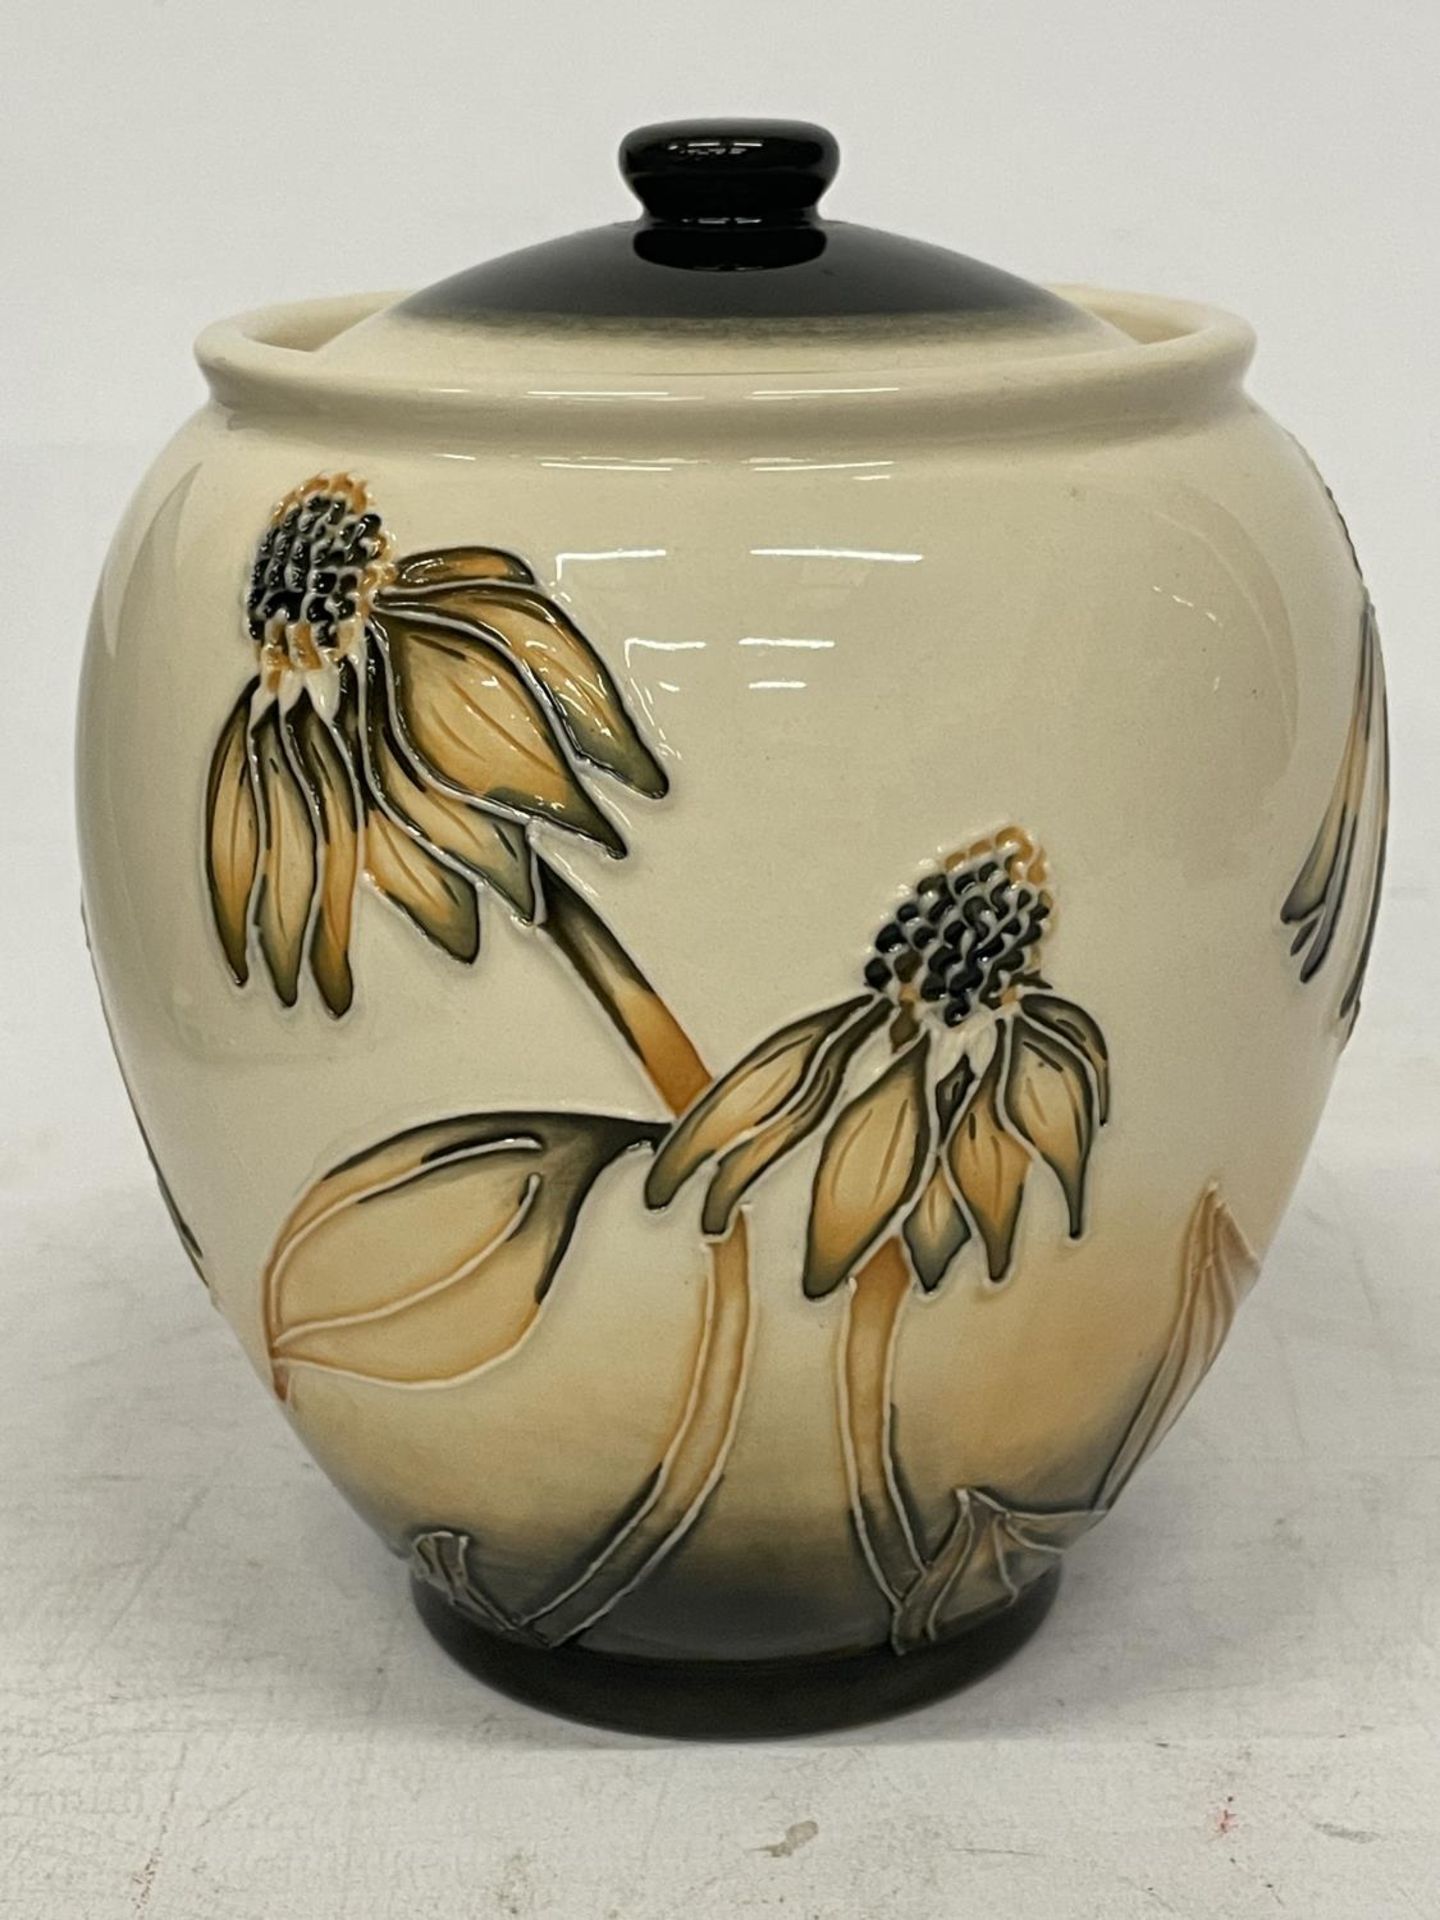 A MOORCROFT GINGER JAR IN THE "CORNFLOWER" PATTERN - Image 2 of 5